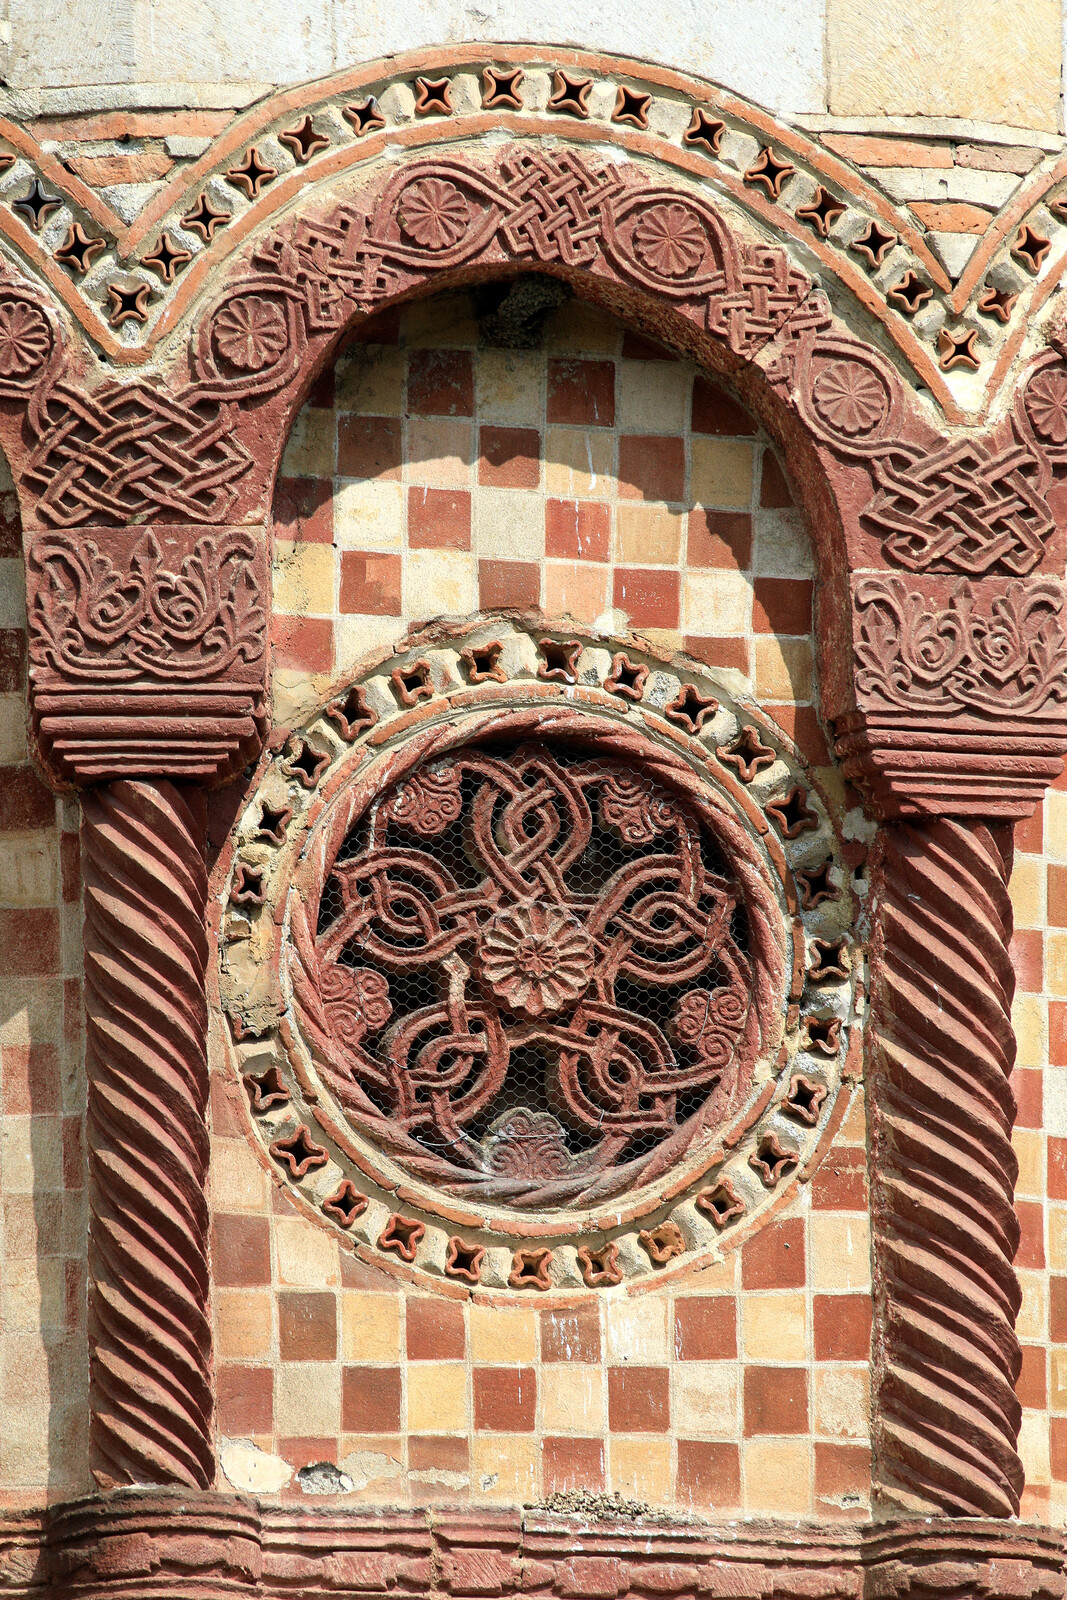 The Arch and Rosette of the South Apse